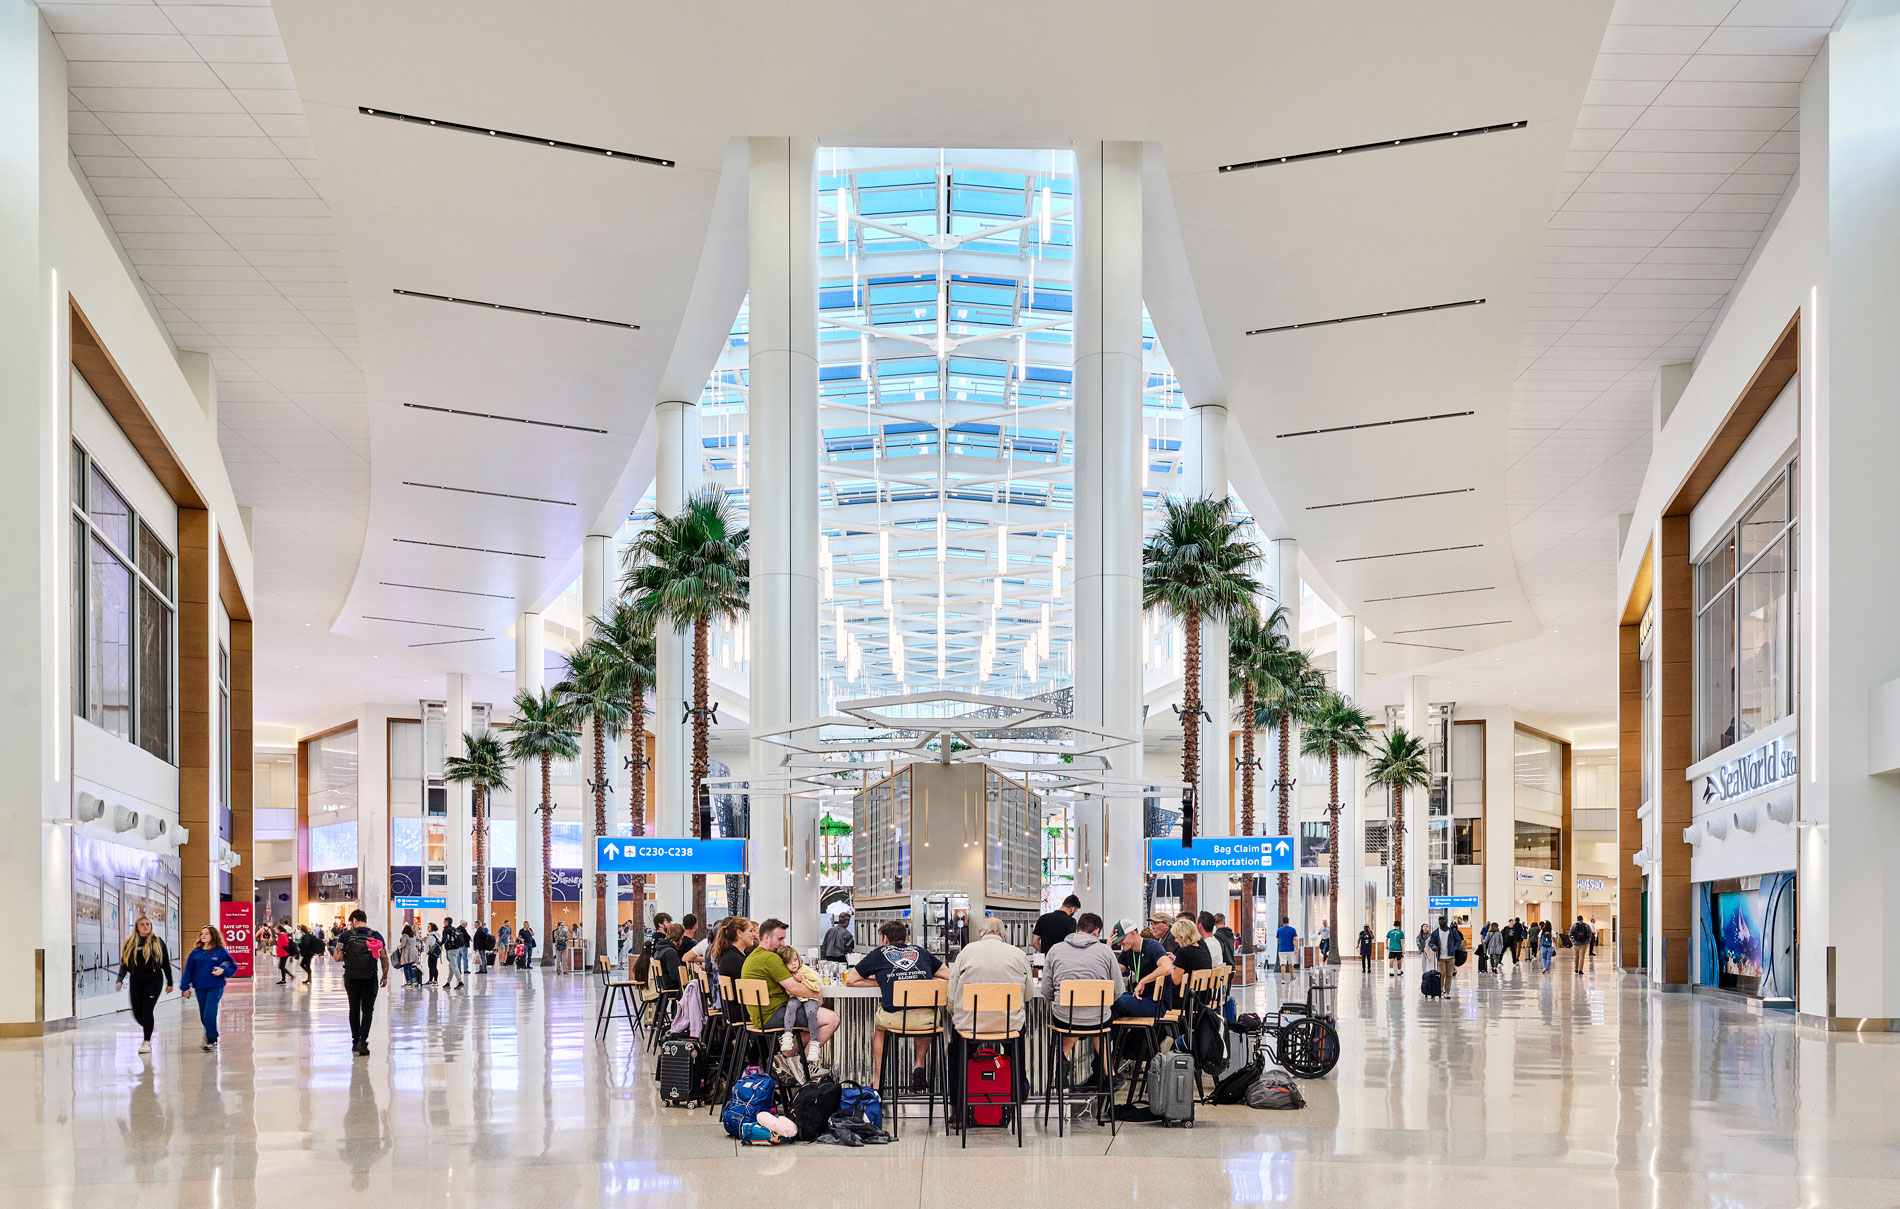 Orlando International Airport South Terminal Complex Wins A+ Awards Special Recognition Architizer